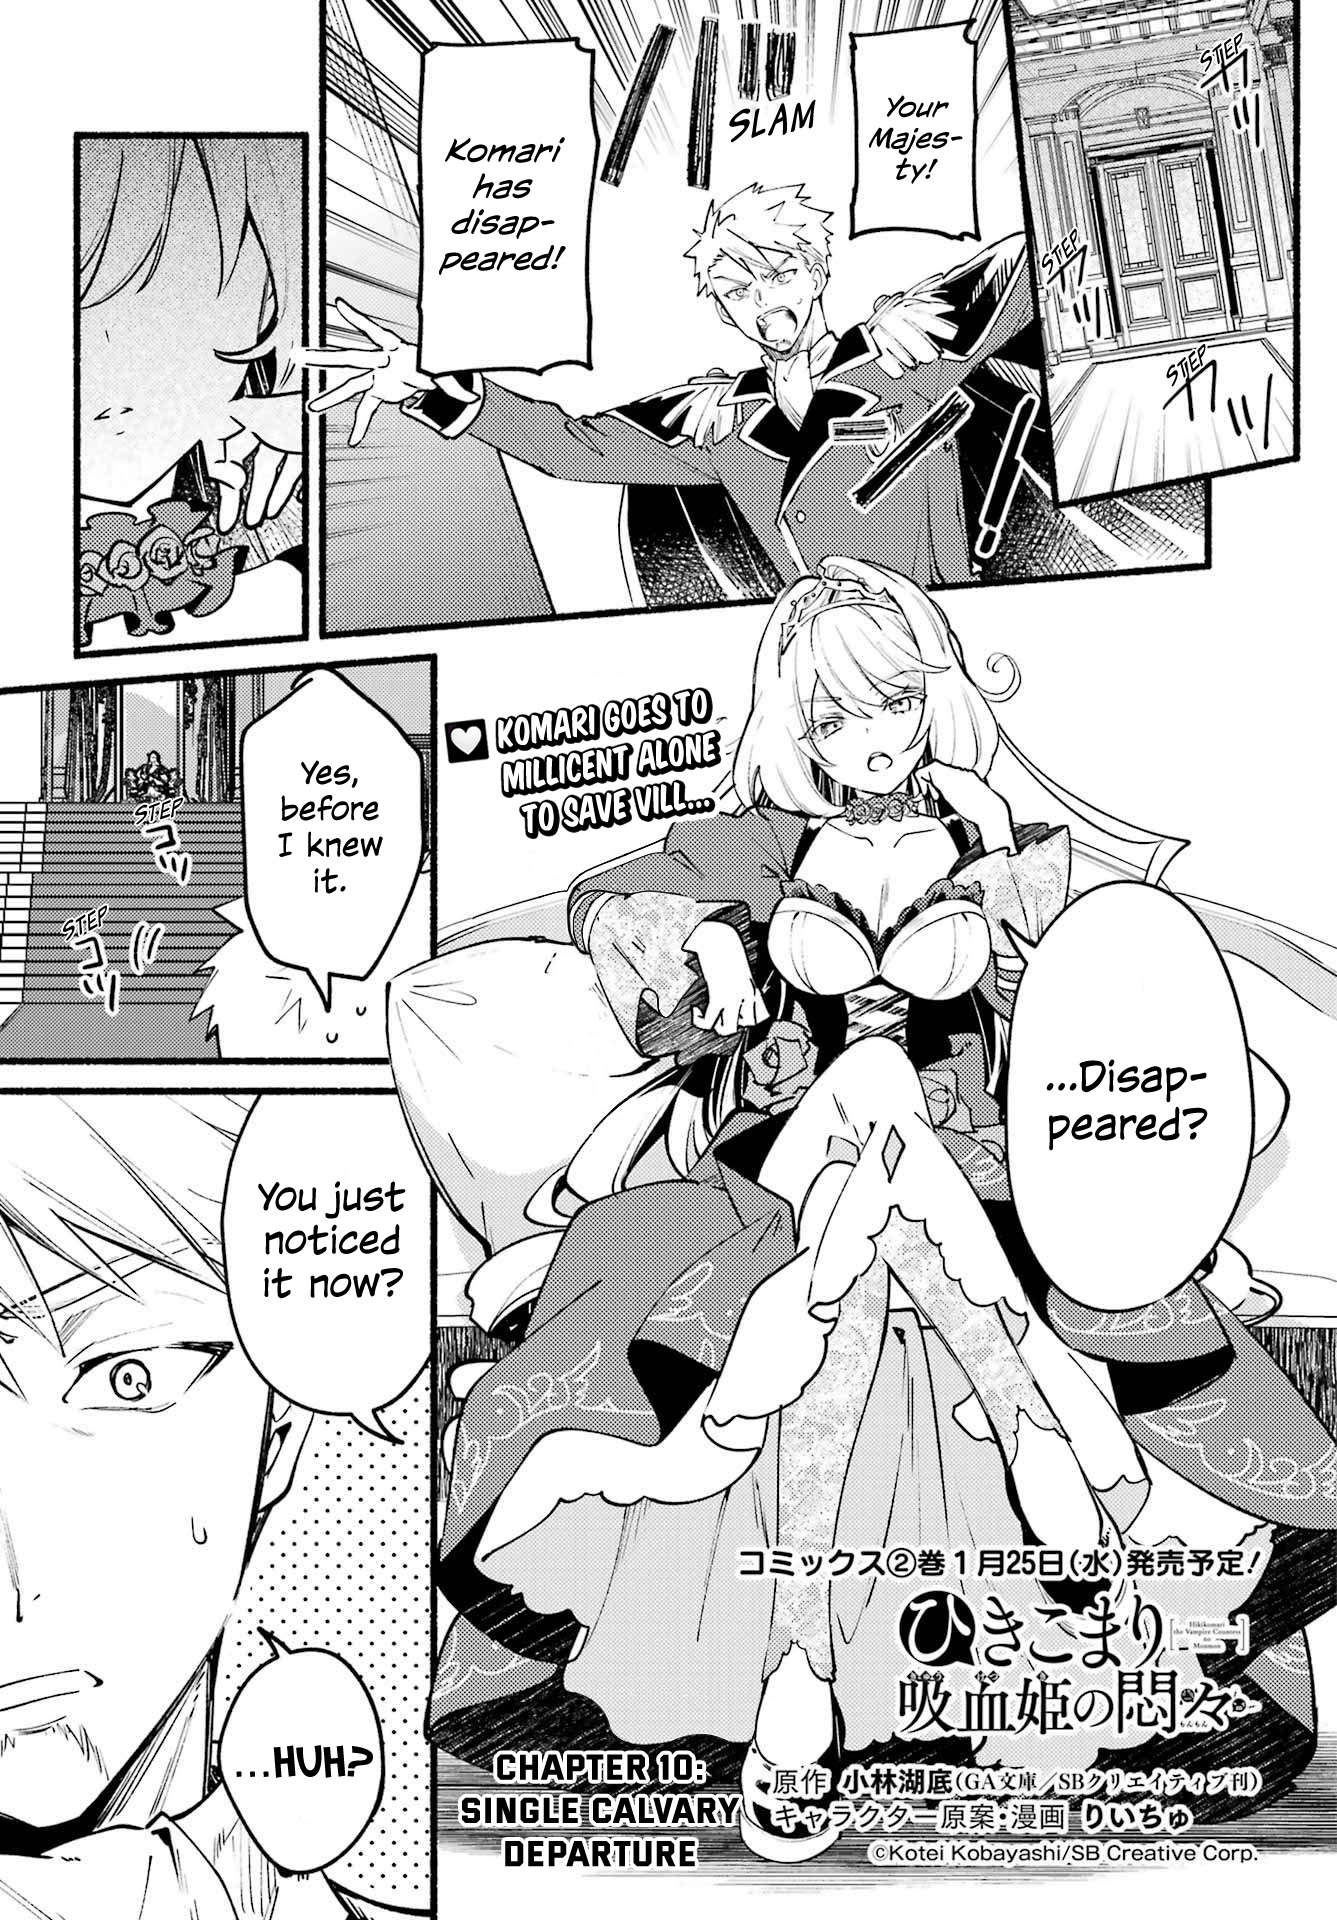 The Shut-In Vampire Princess’ Worries Vol.2 Chapter 10: Single Calvary Departure - Picture 3